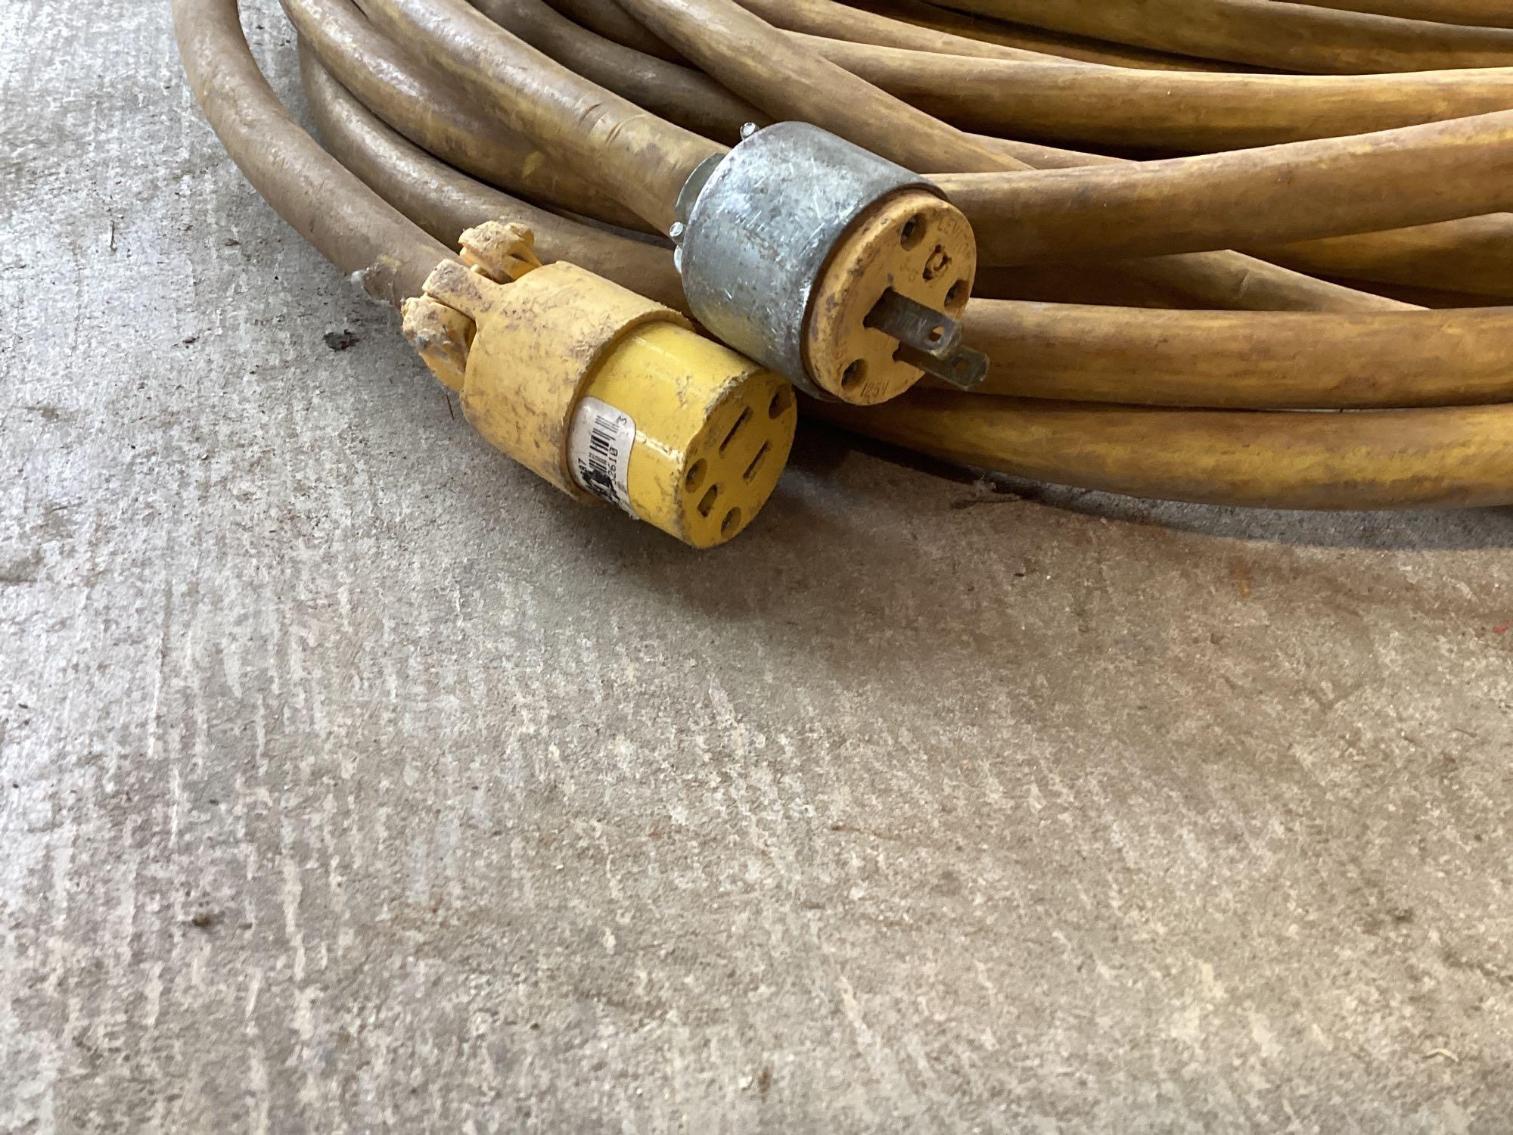 Image for Commercial Extension Cord